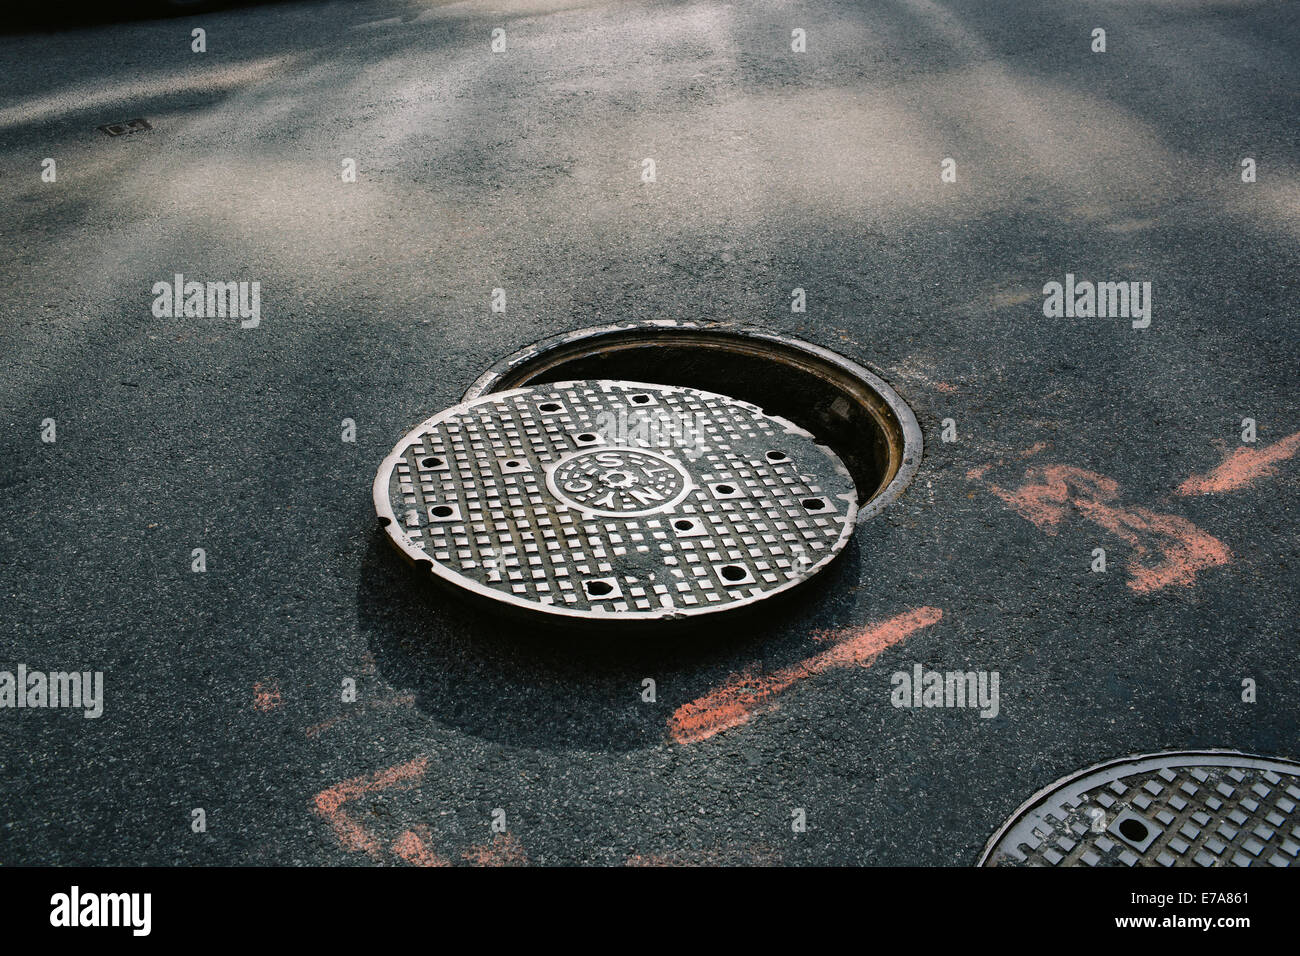 A manhole cover partially removed, close-up Stock Photo